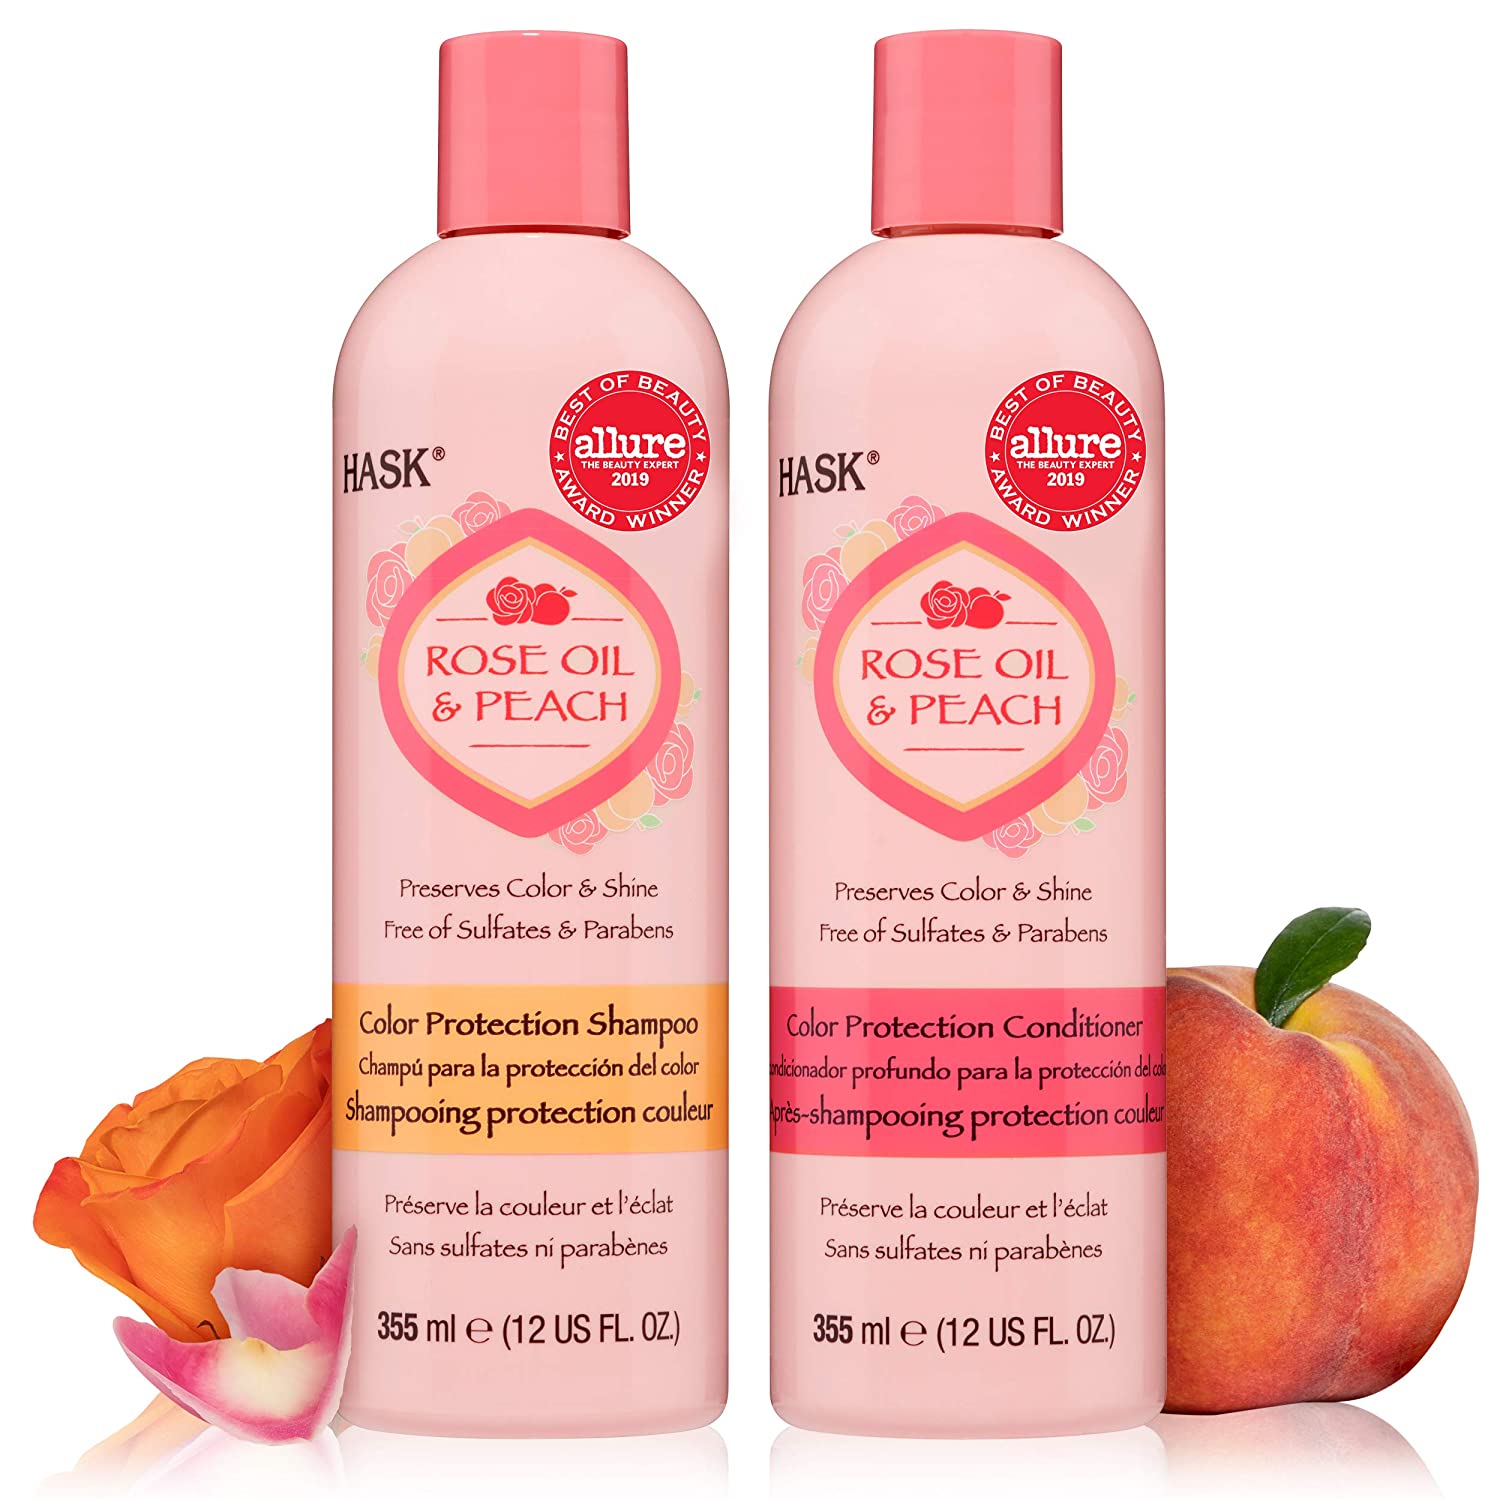 HASK ROSE OIL + PEACH Shampoo and Conditioner Set Color Protecting - Color safe, gluten-free, sulfate-free, paraben-free Allure Best of Beauty Award Winner- 1 Shampoo + 1 Conditioner 